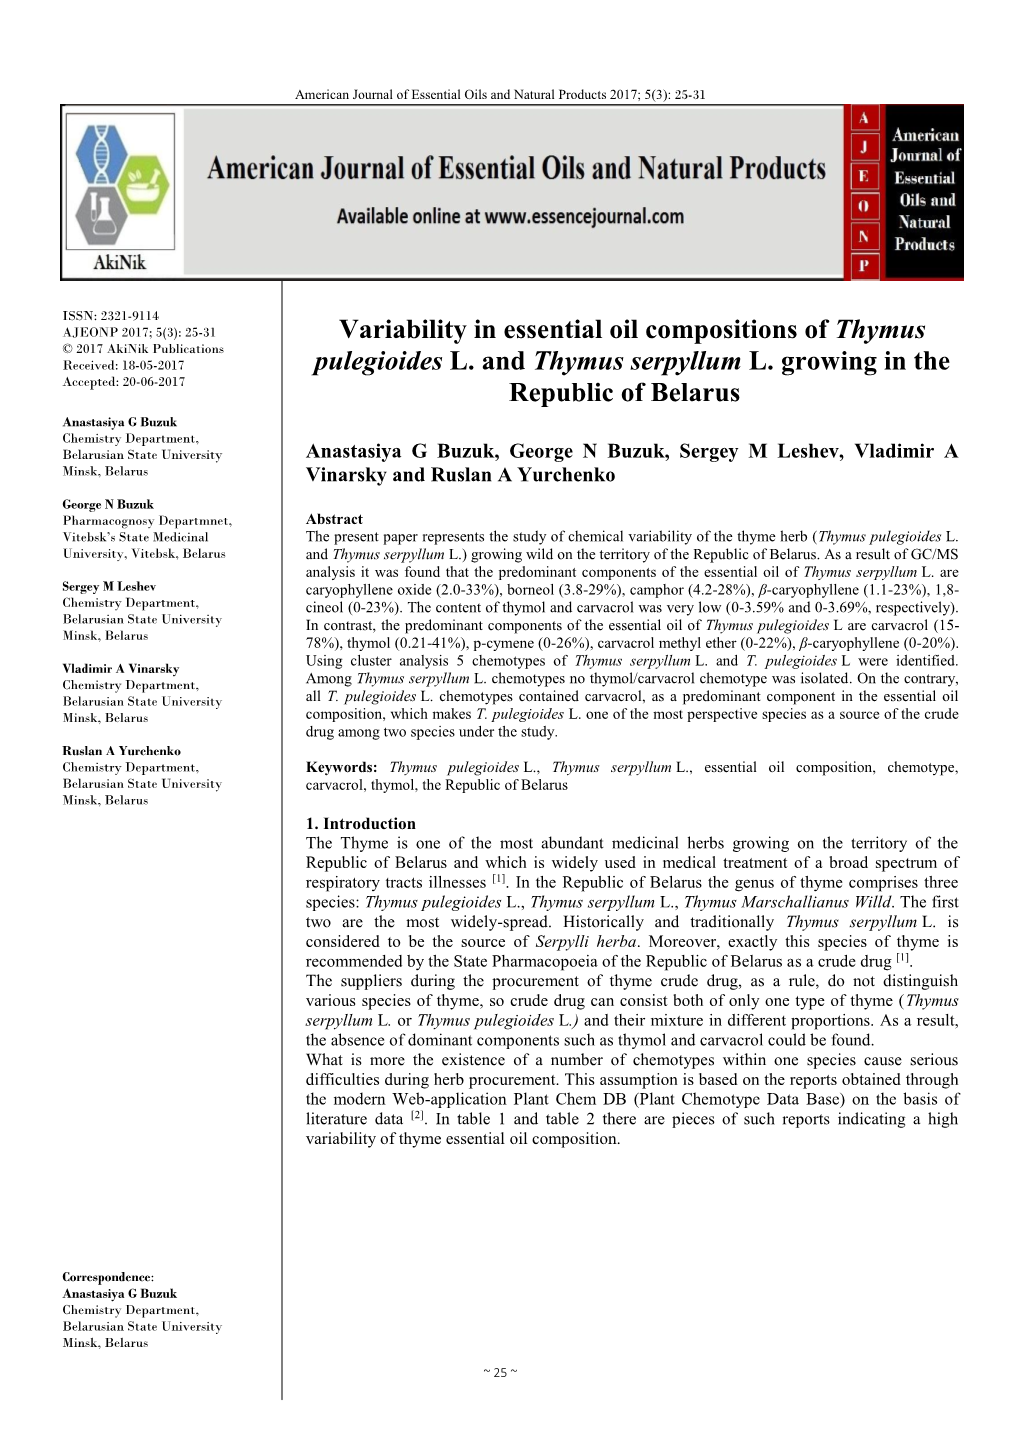 Variability in Essential Oil Compositions of Thymus Pulegioides L. and Thymus Serpyllum L. Growing in the Republic of Belarus